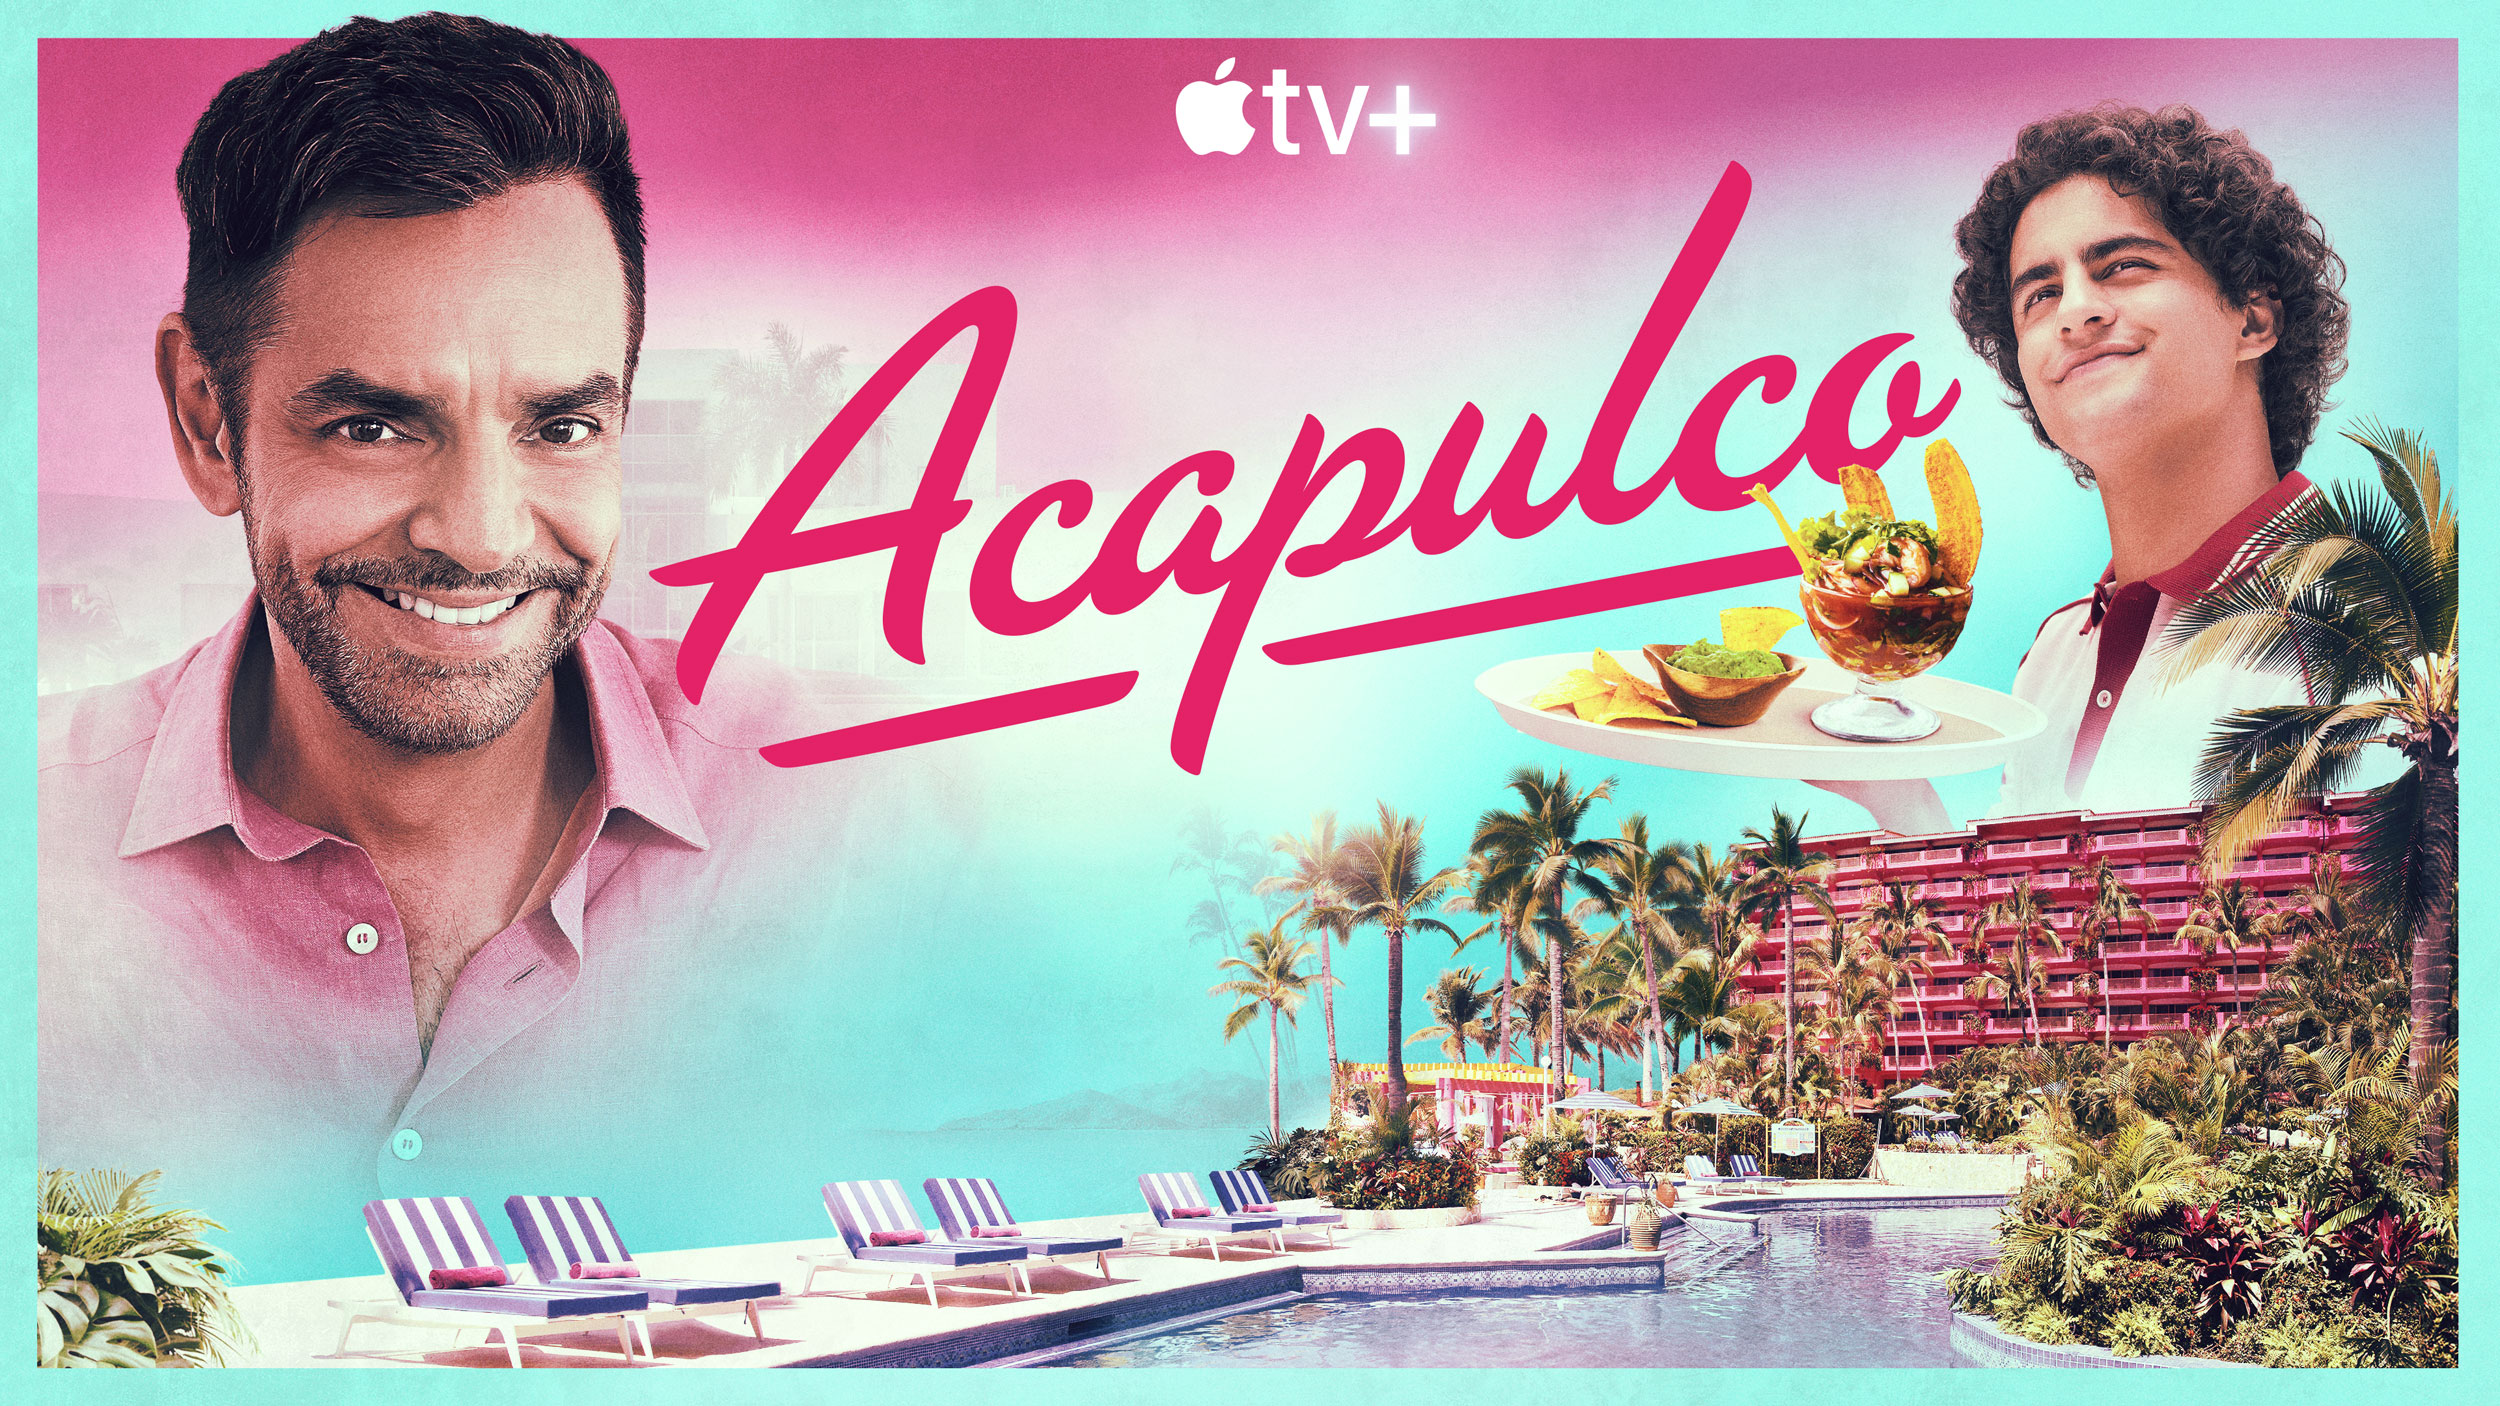 Acapulco [credit: courtesy of Apple]